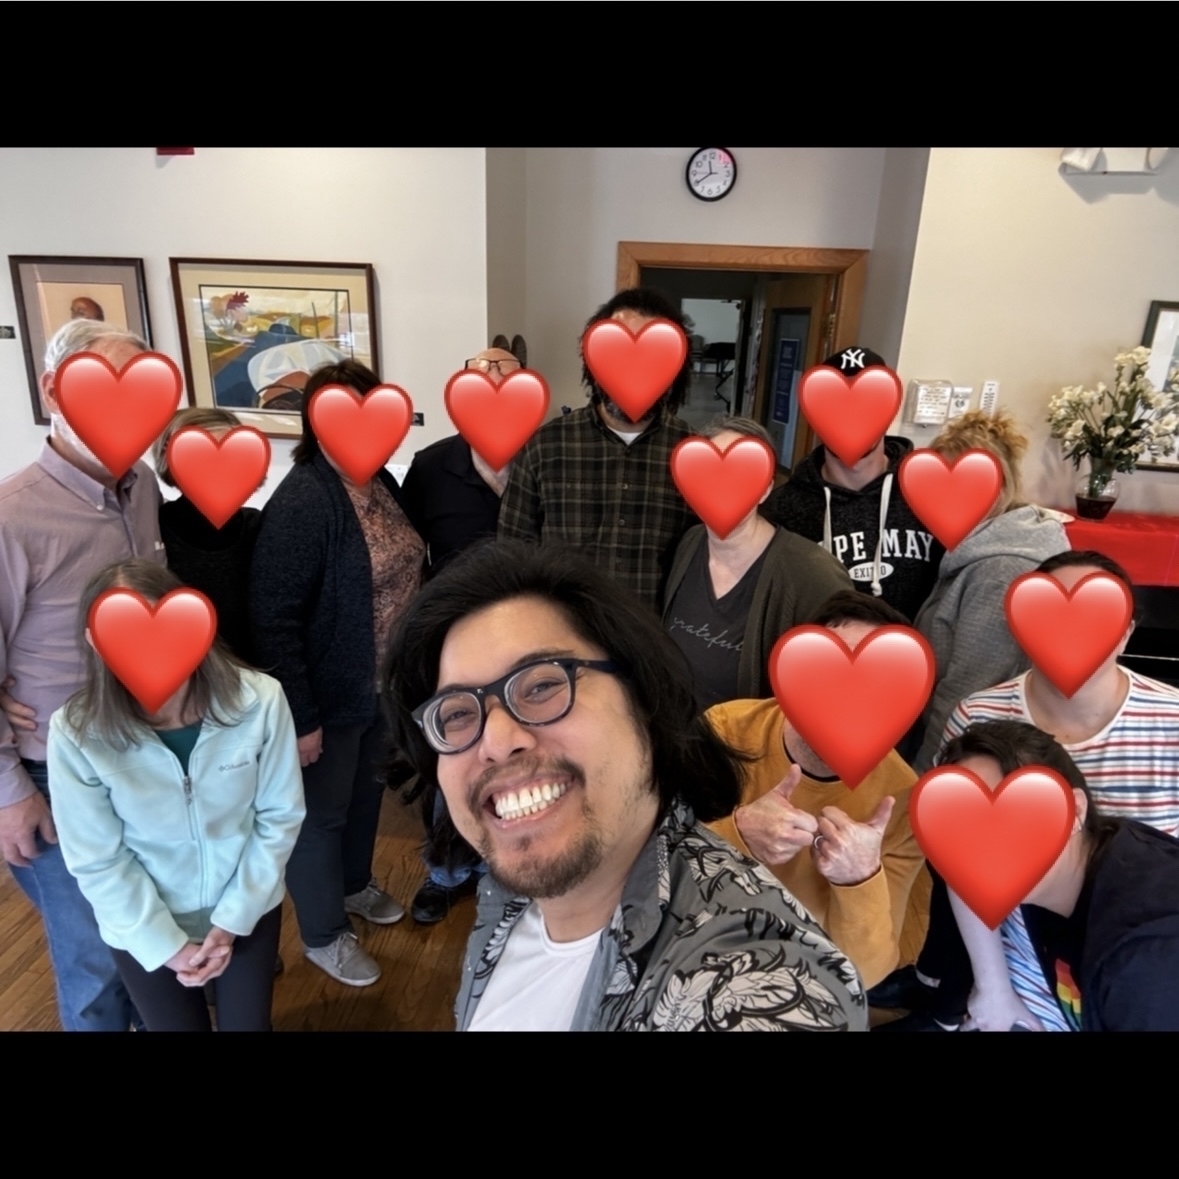  A group of people of all ages are posing for a photo in a room. The people are all smiling and some are making peace signs. There are red heart emojis covering the faces of the people in the photo.